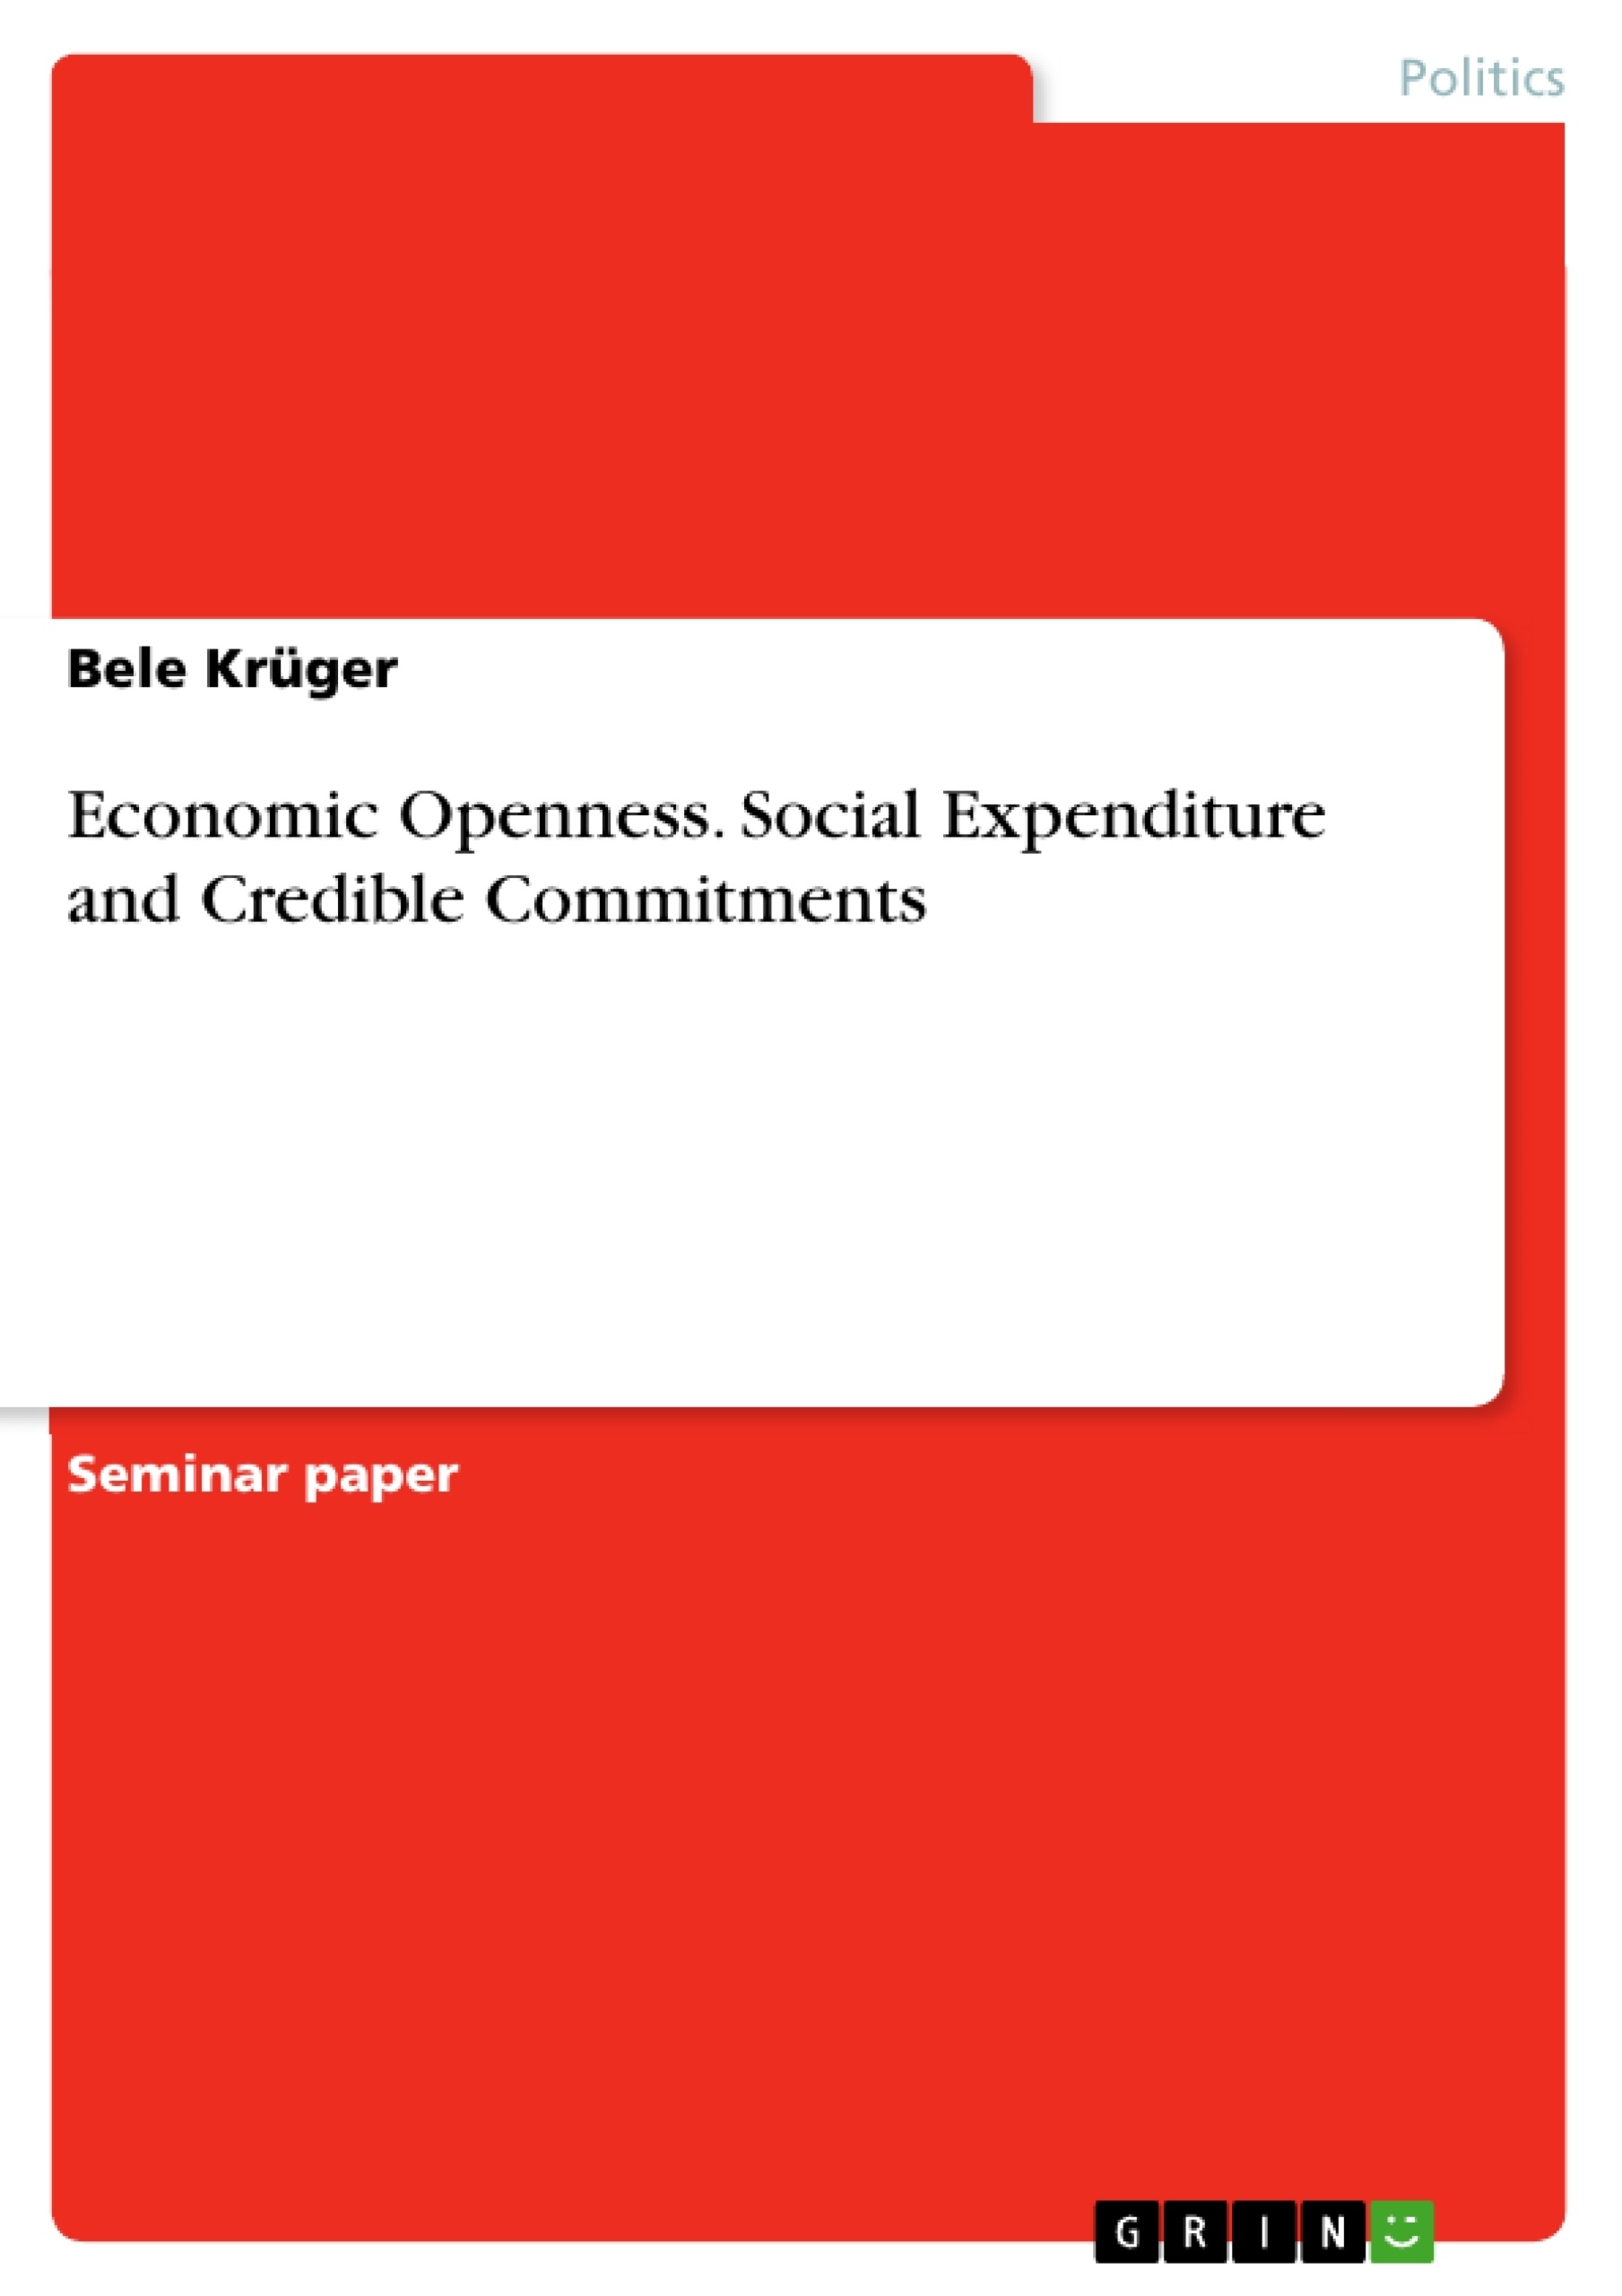 Title: Economic Openness. Social Expenditure and Credible Commitments